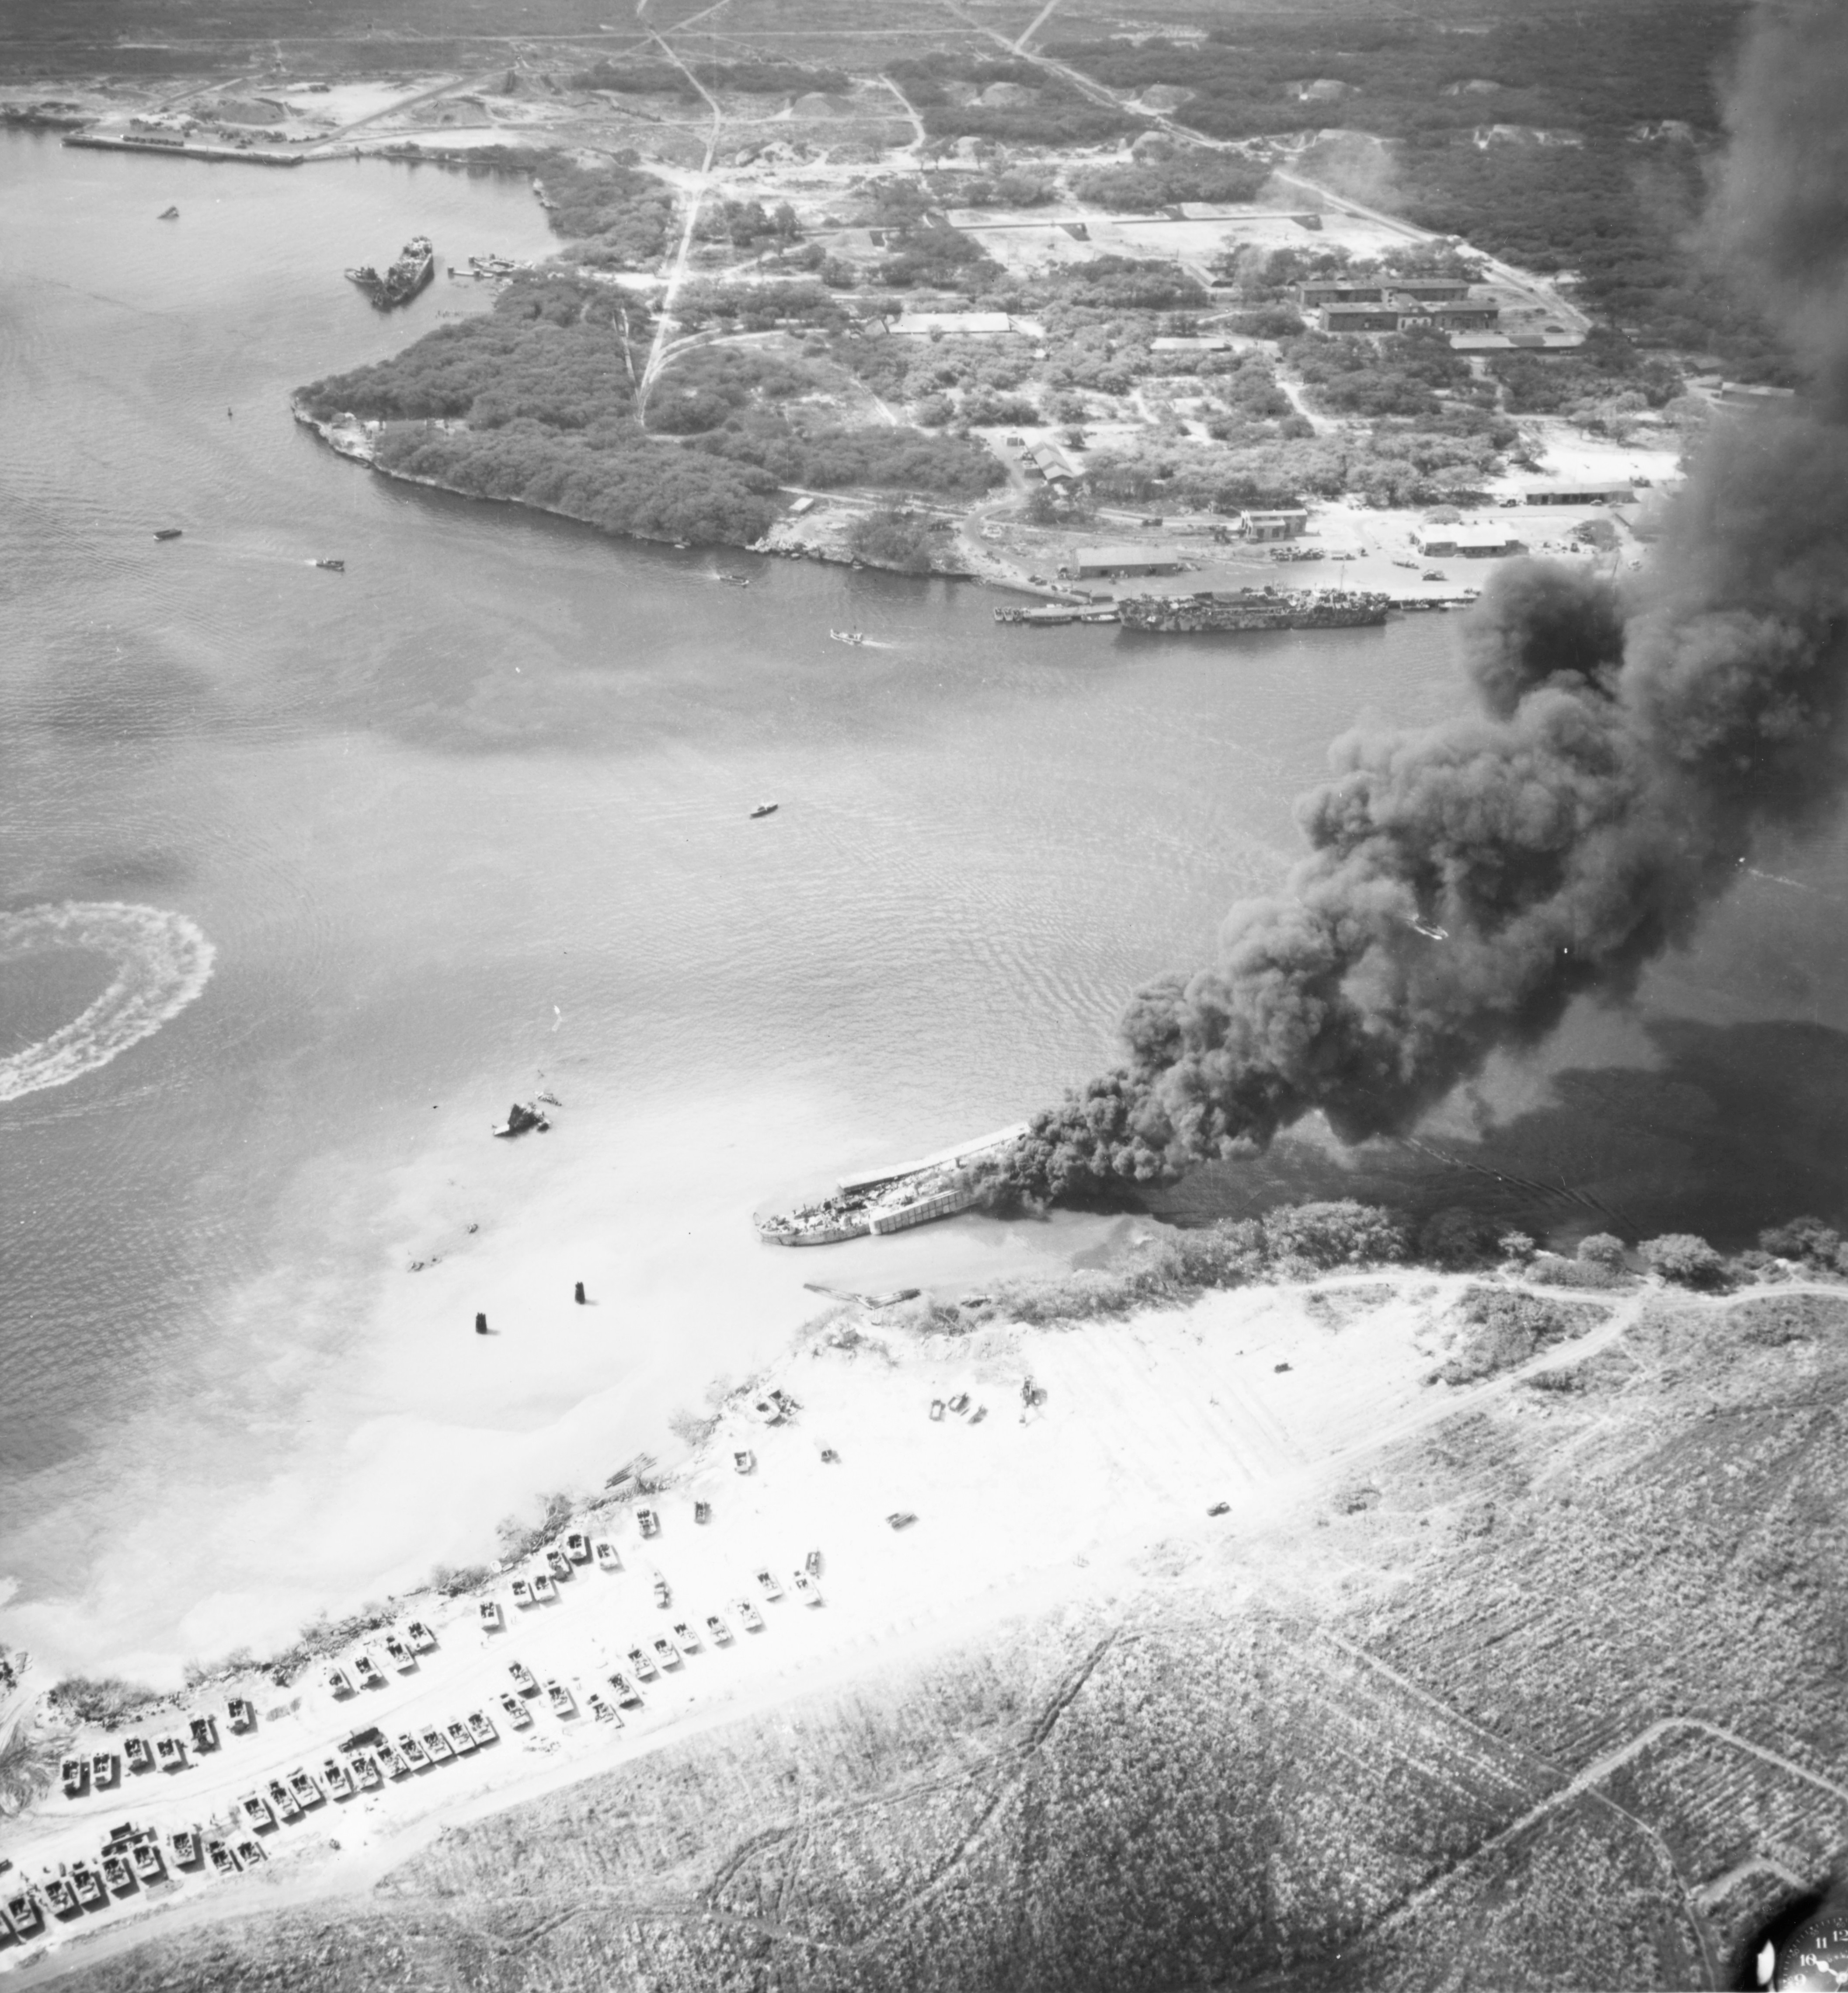 LST-480 burning in West Loch, Pearl Harbor, Hawaii, 23 May 1944 two days after the West Loch explosion that sank six LSTs. The chain-reaction explosion started on LST-39 whose wreckage is visible off LST-480’s bow.